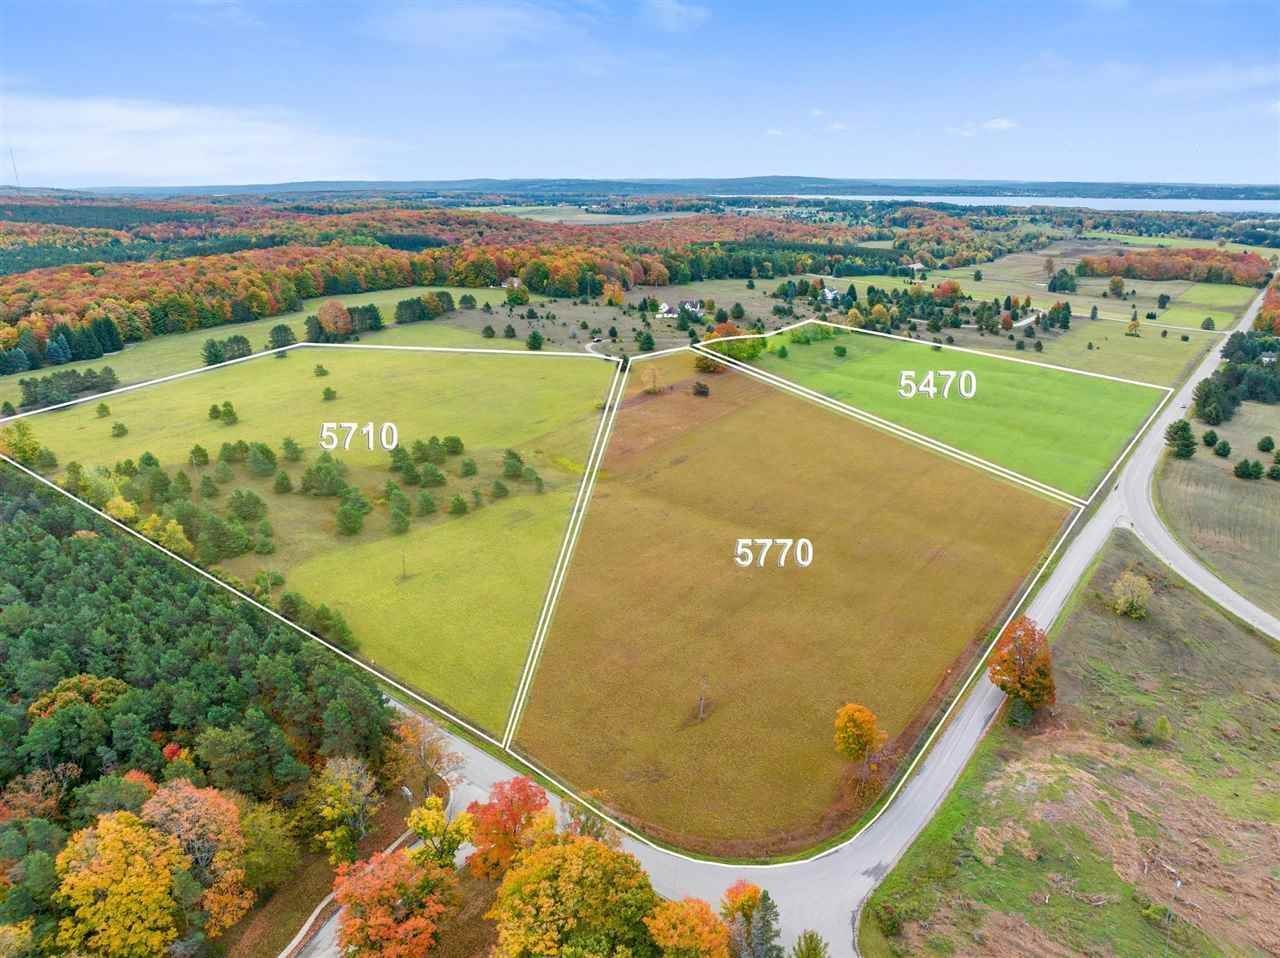 15. Land for Sale at 5740 Deer Run Trail Harbor Springs, Michigan 49740 United States